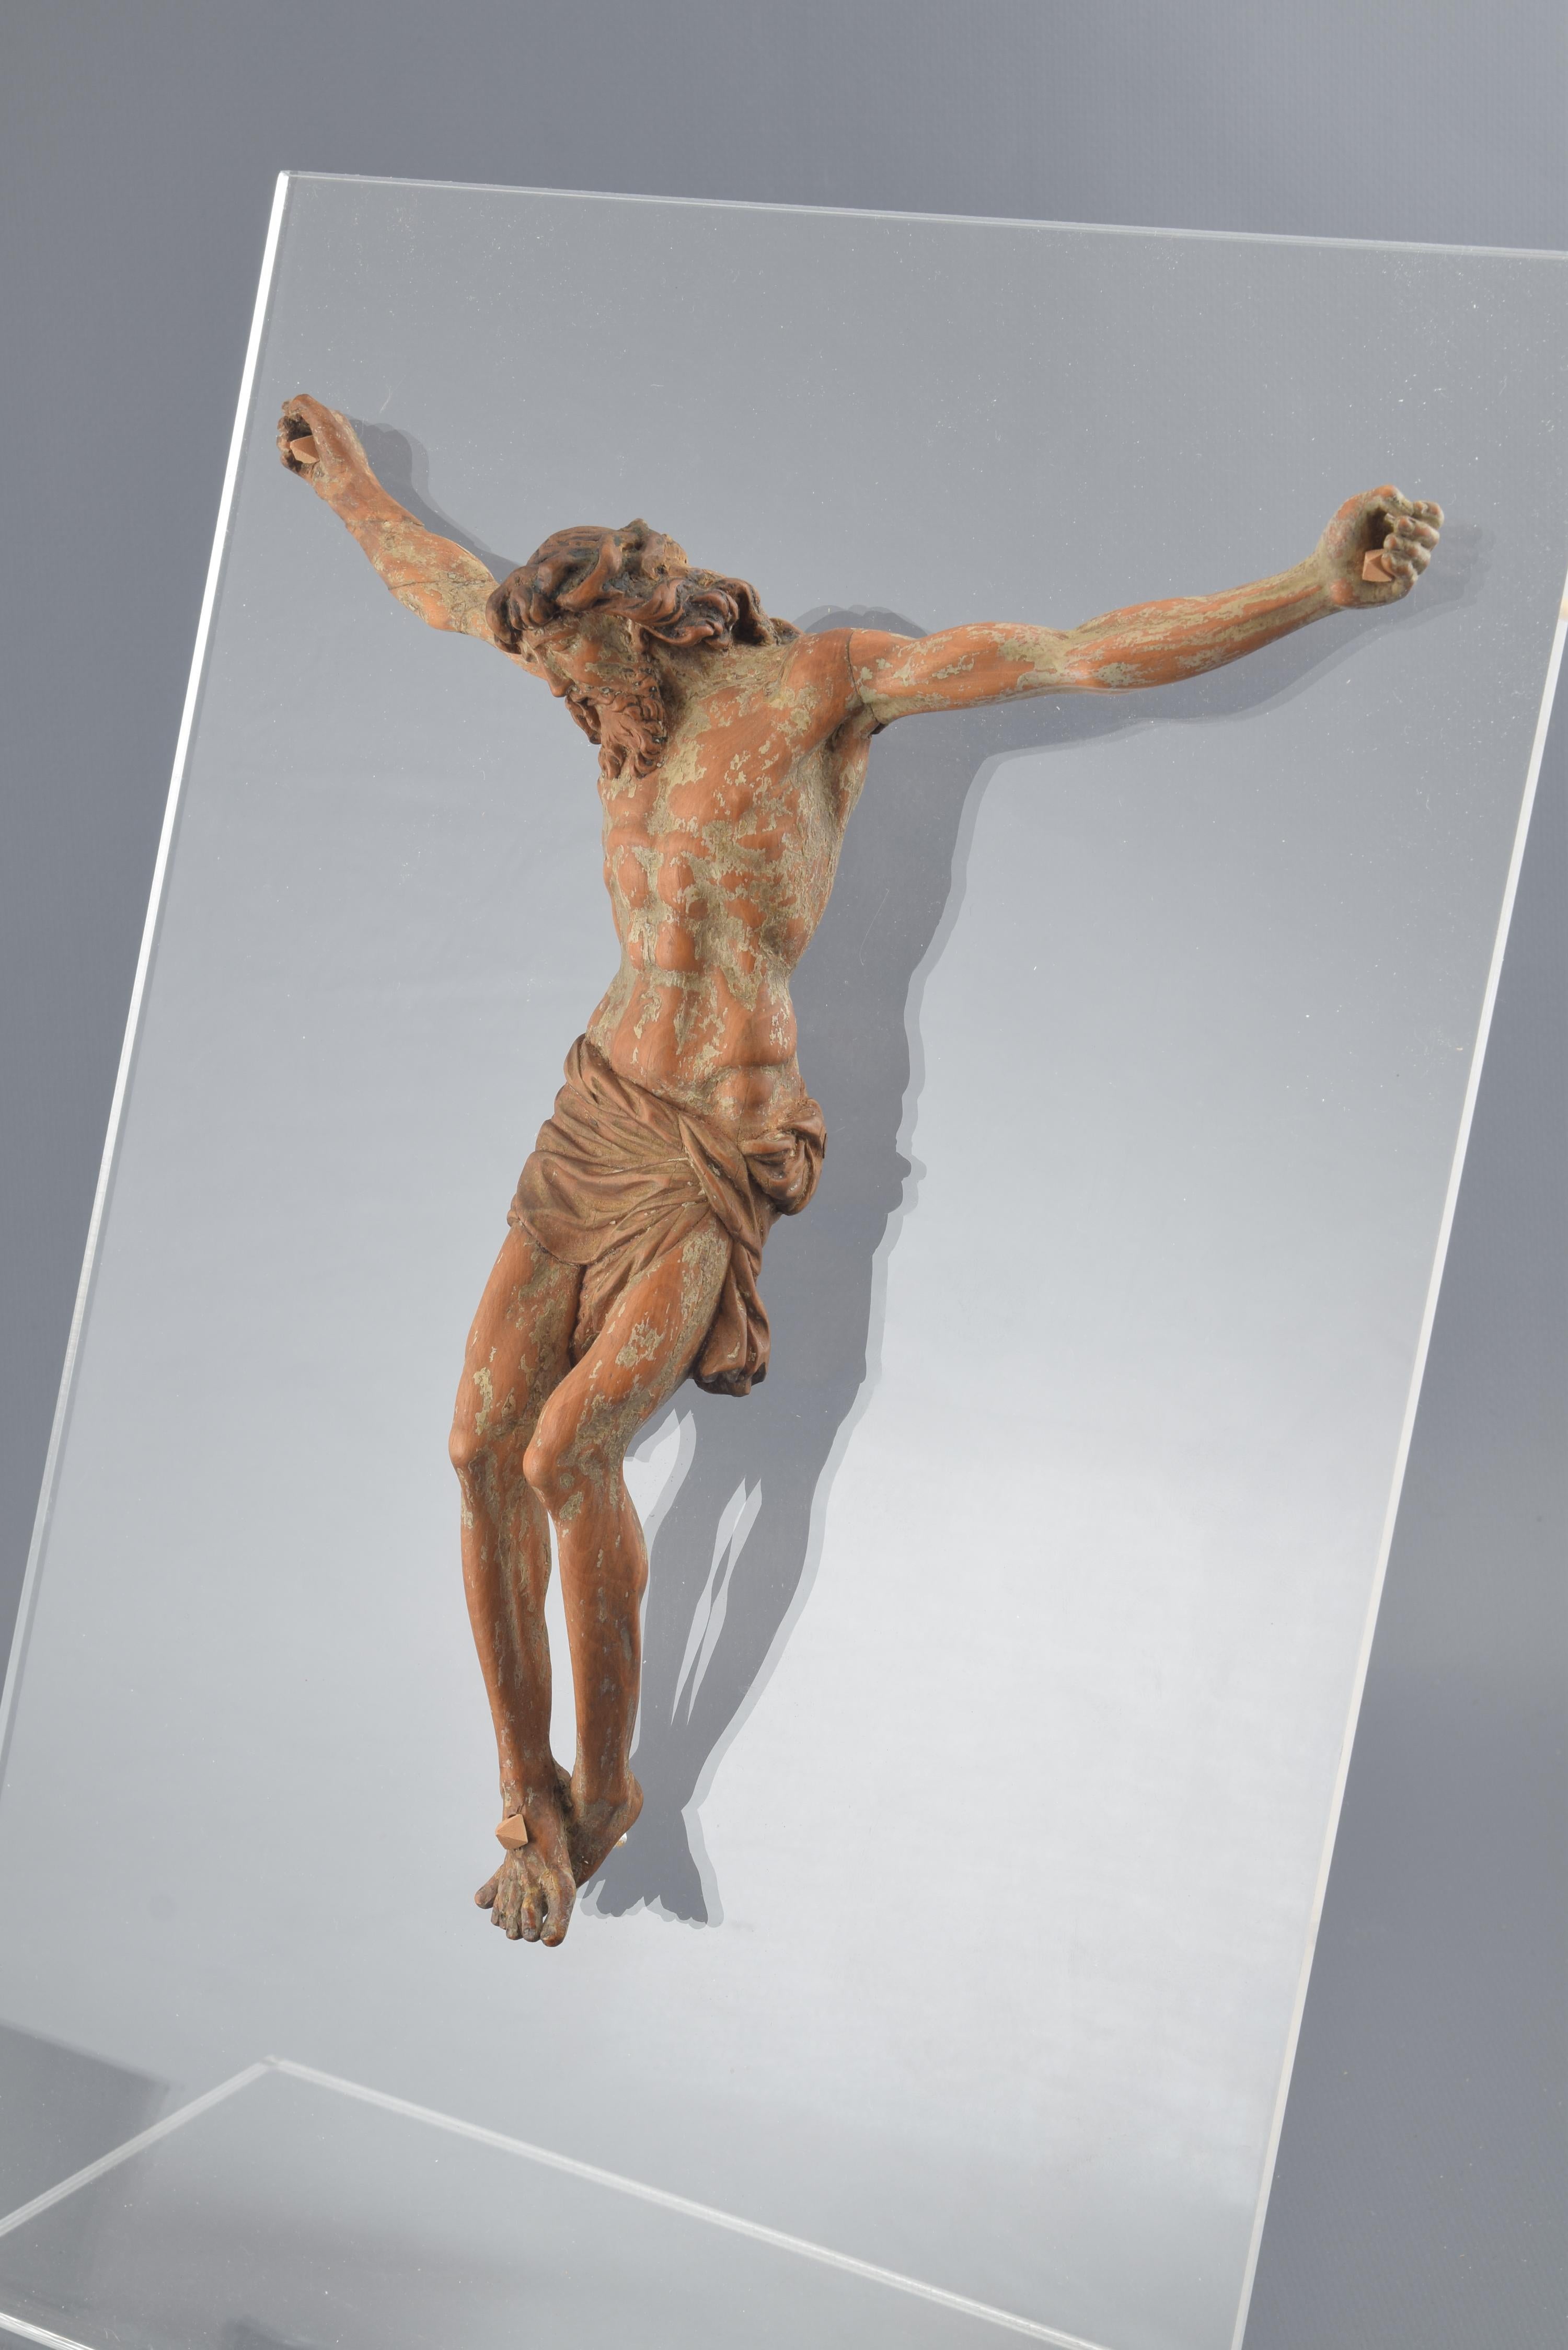 THIS ITEM CANNOT BE EXPORTED OUTSIDE OF SPAIN.
Crucified Christ. Carved boxwood. Attributed to Juan de Juni (France, 1506-Valladolid, 1557) or workshop, Spain, towards the end of the 16th century.
Inexportable work.
Crucified Christ made in carved